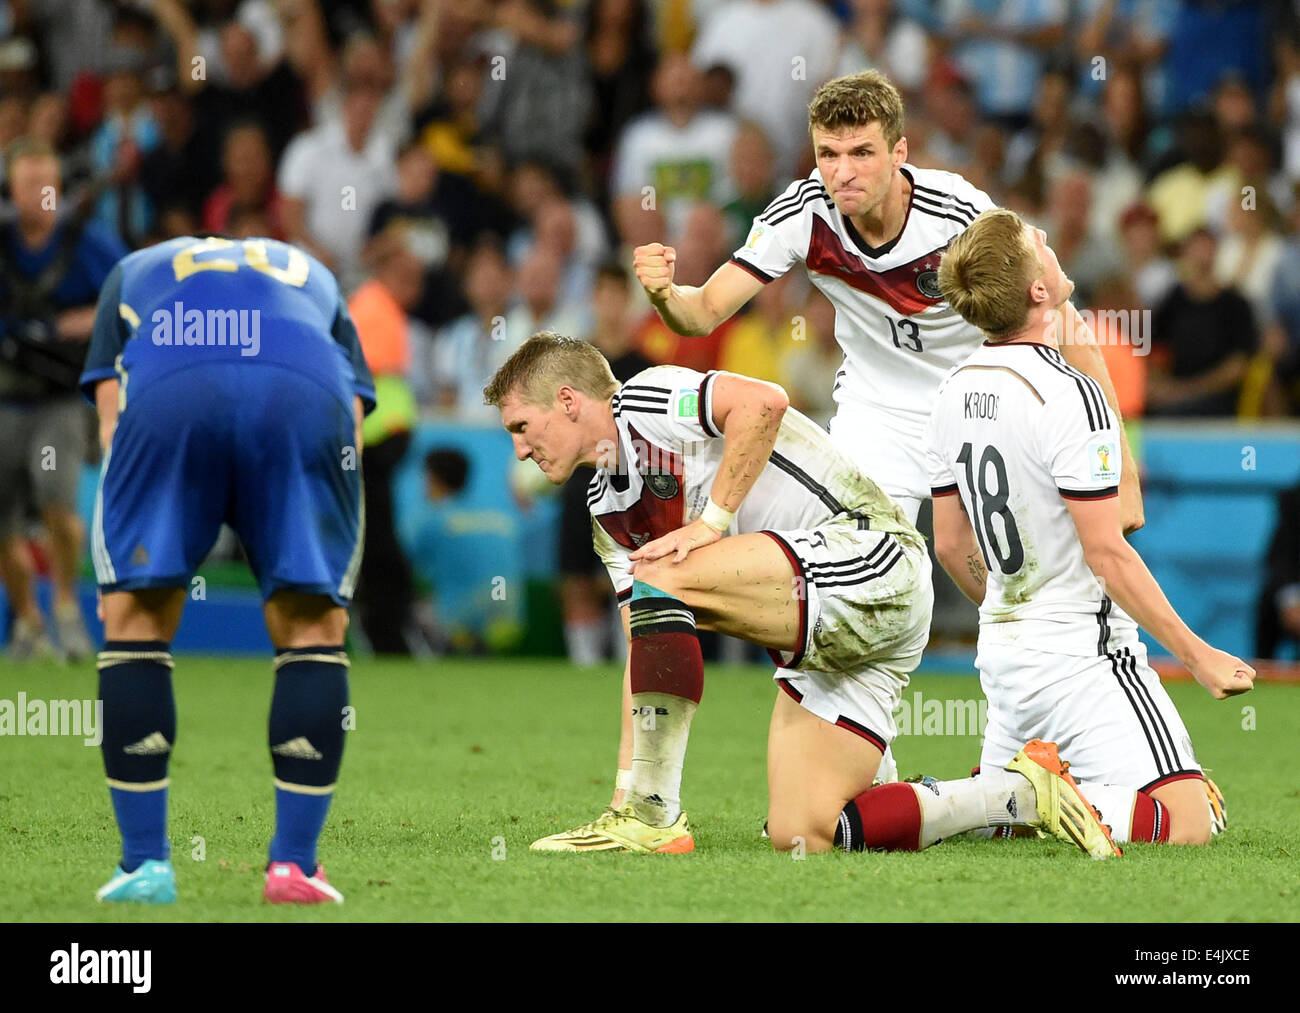 Rio De Janeiro, Brazil. 13th July, 2014. Germany's Toni Kroos, Thomas Muller and Bastian Schweinsteiger (1st R to 3rd R) celebrate their victory after the final match between Germany and Argentina of 2014 FIFA World Cup at the Estadio do Maracana Stadium in Rio de Janeiro, Brazil, on July 13, 2014. Germany won 1-0 over Argentina after 120 minutes and took its fourth World Cup title on Sunday. Credit:  Liu Dawei/Xinhua/Alamy Live News Stock Photo